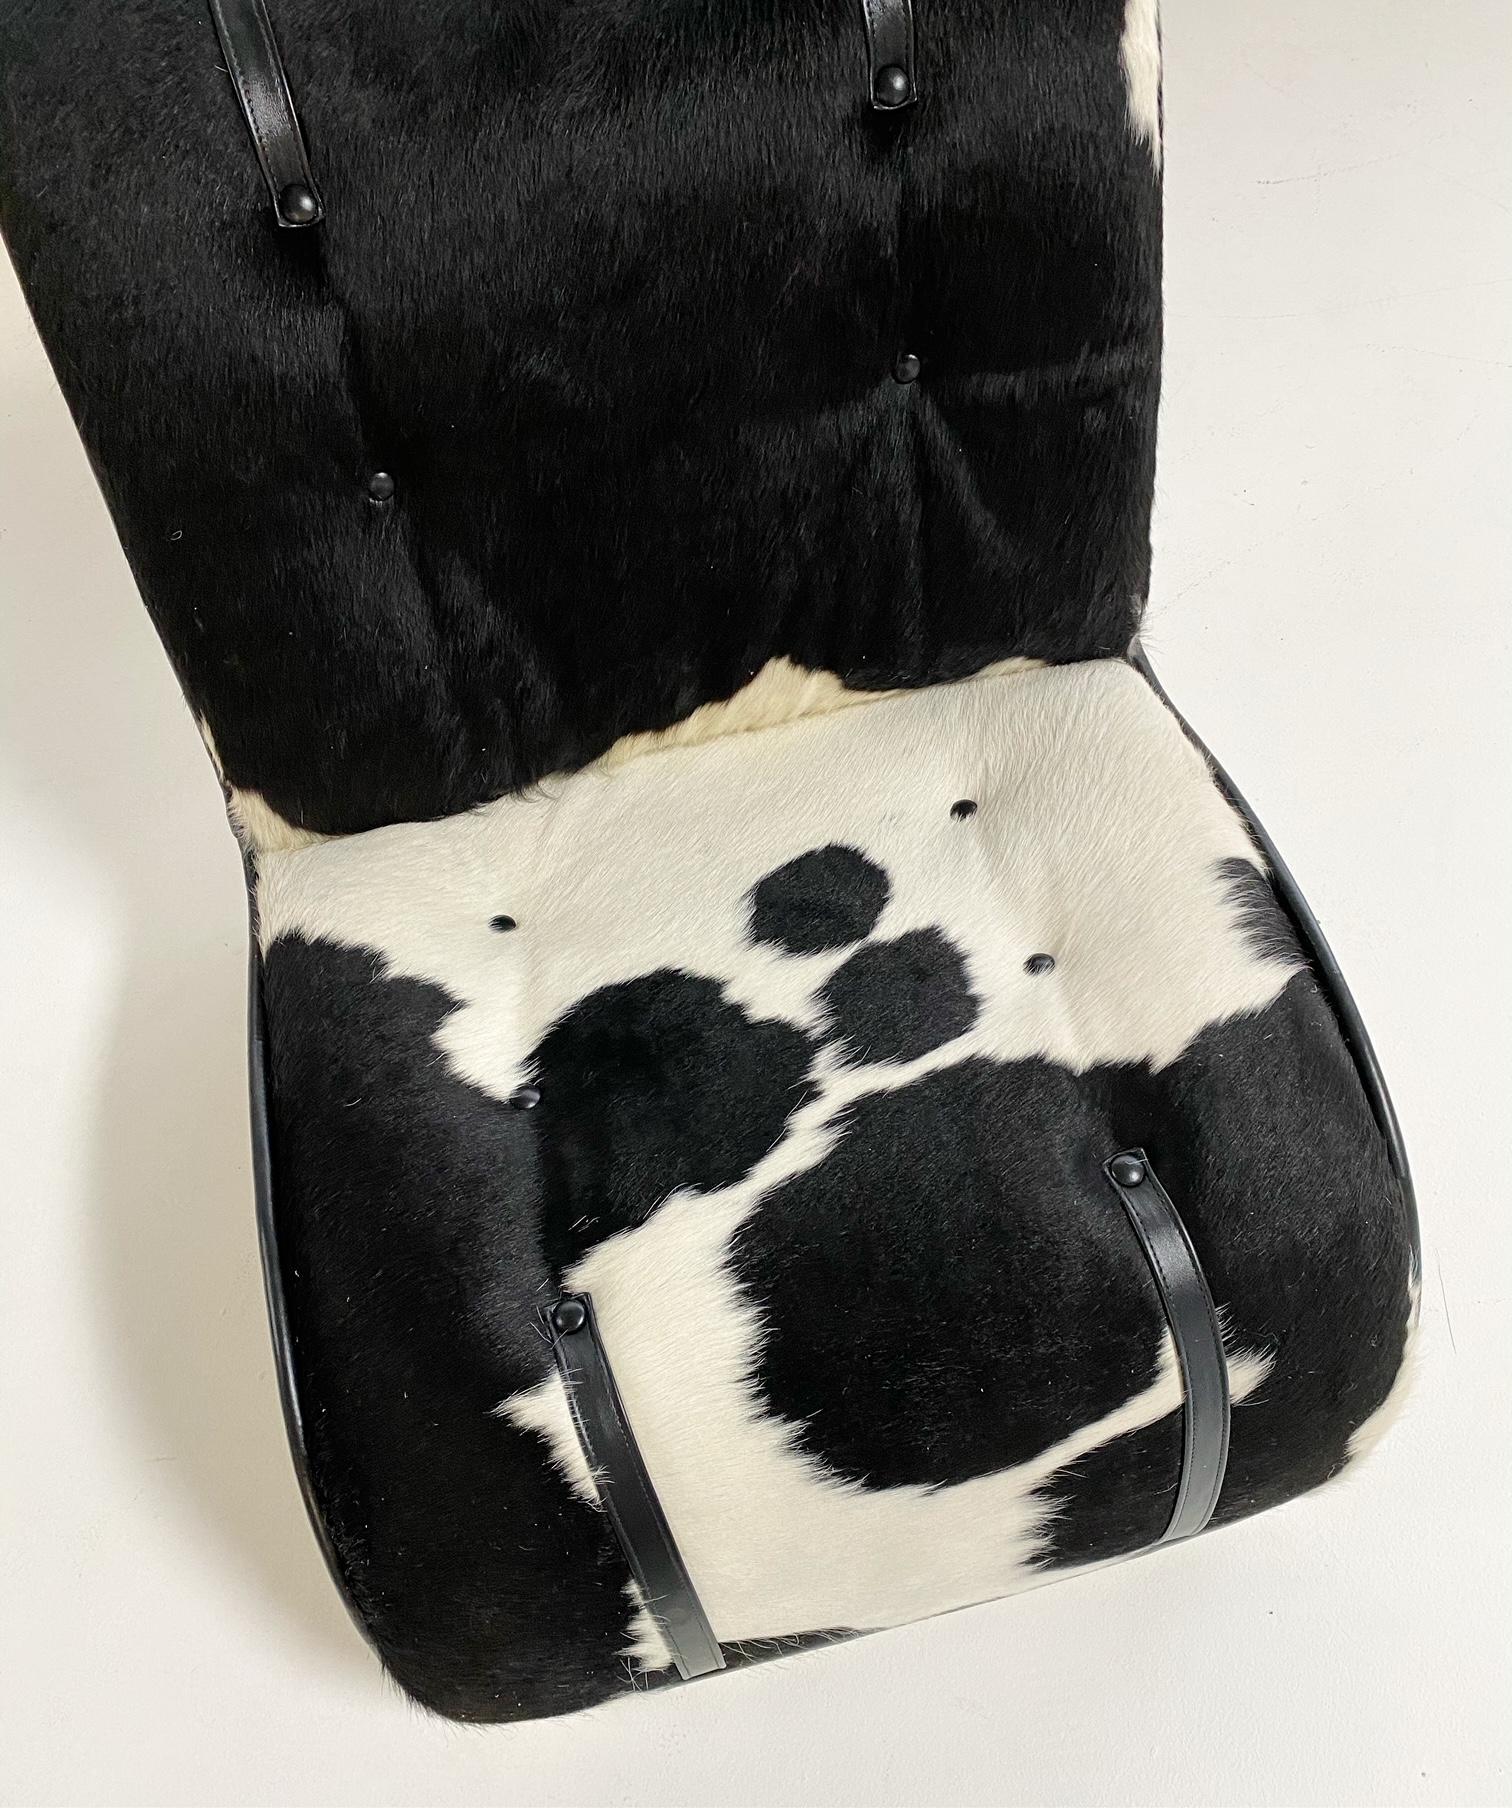 Danish Verner Panton Fiberglass Lounge Chairs in Brazilian Cowhide and Leather, Pair For Sale